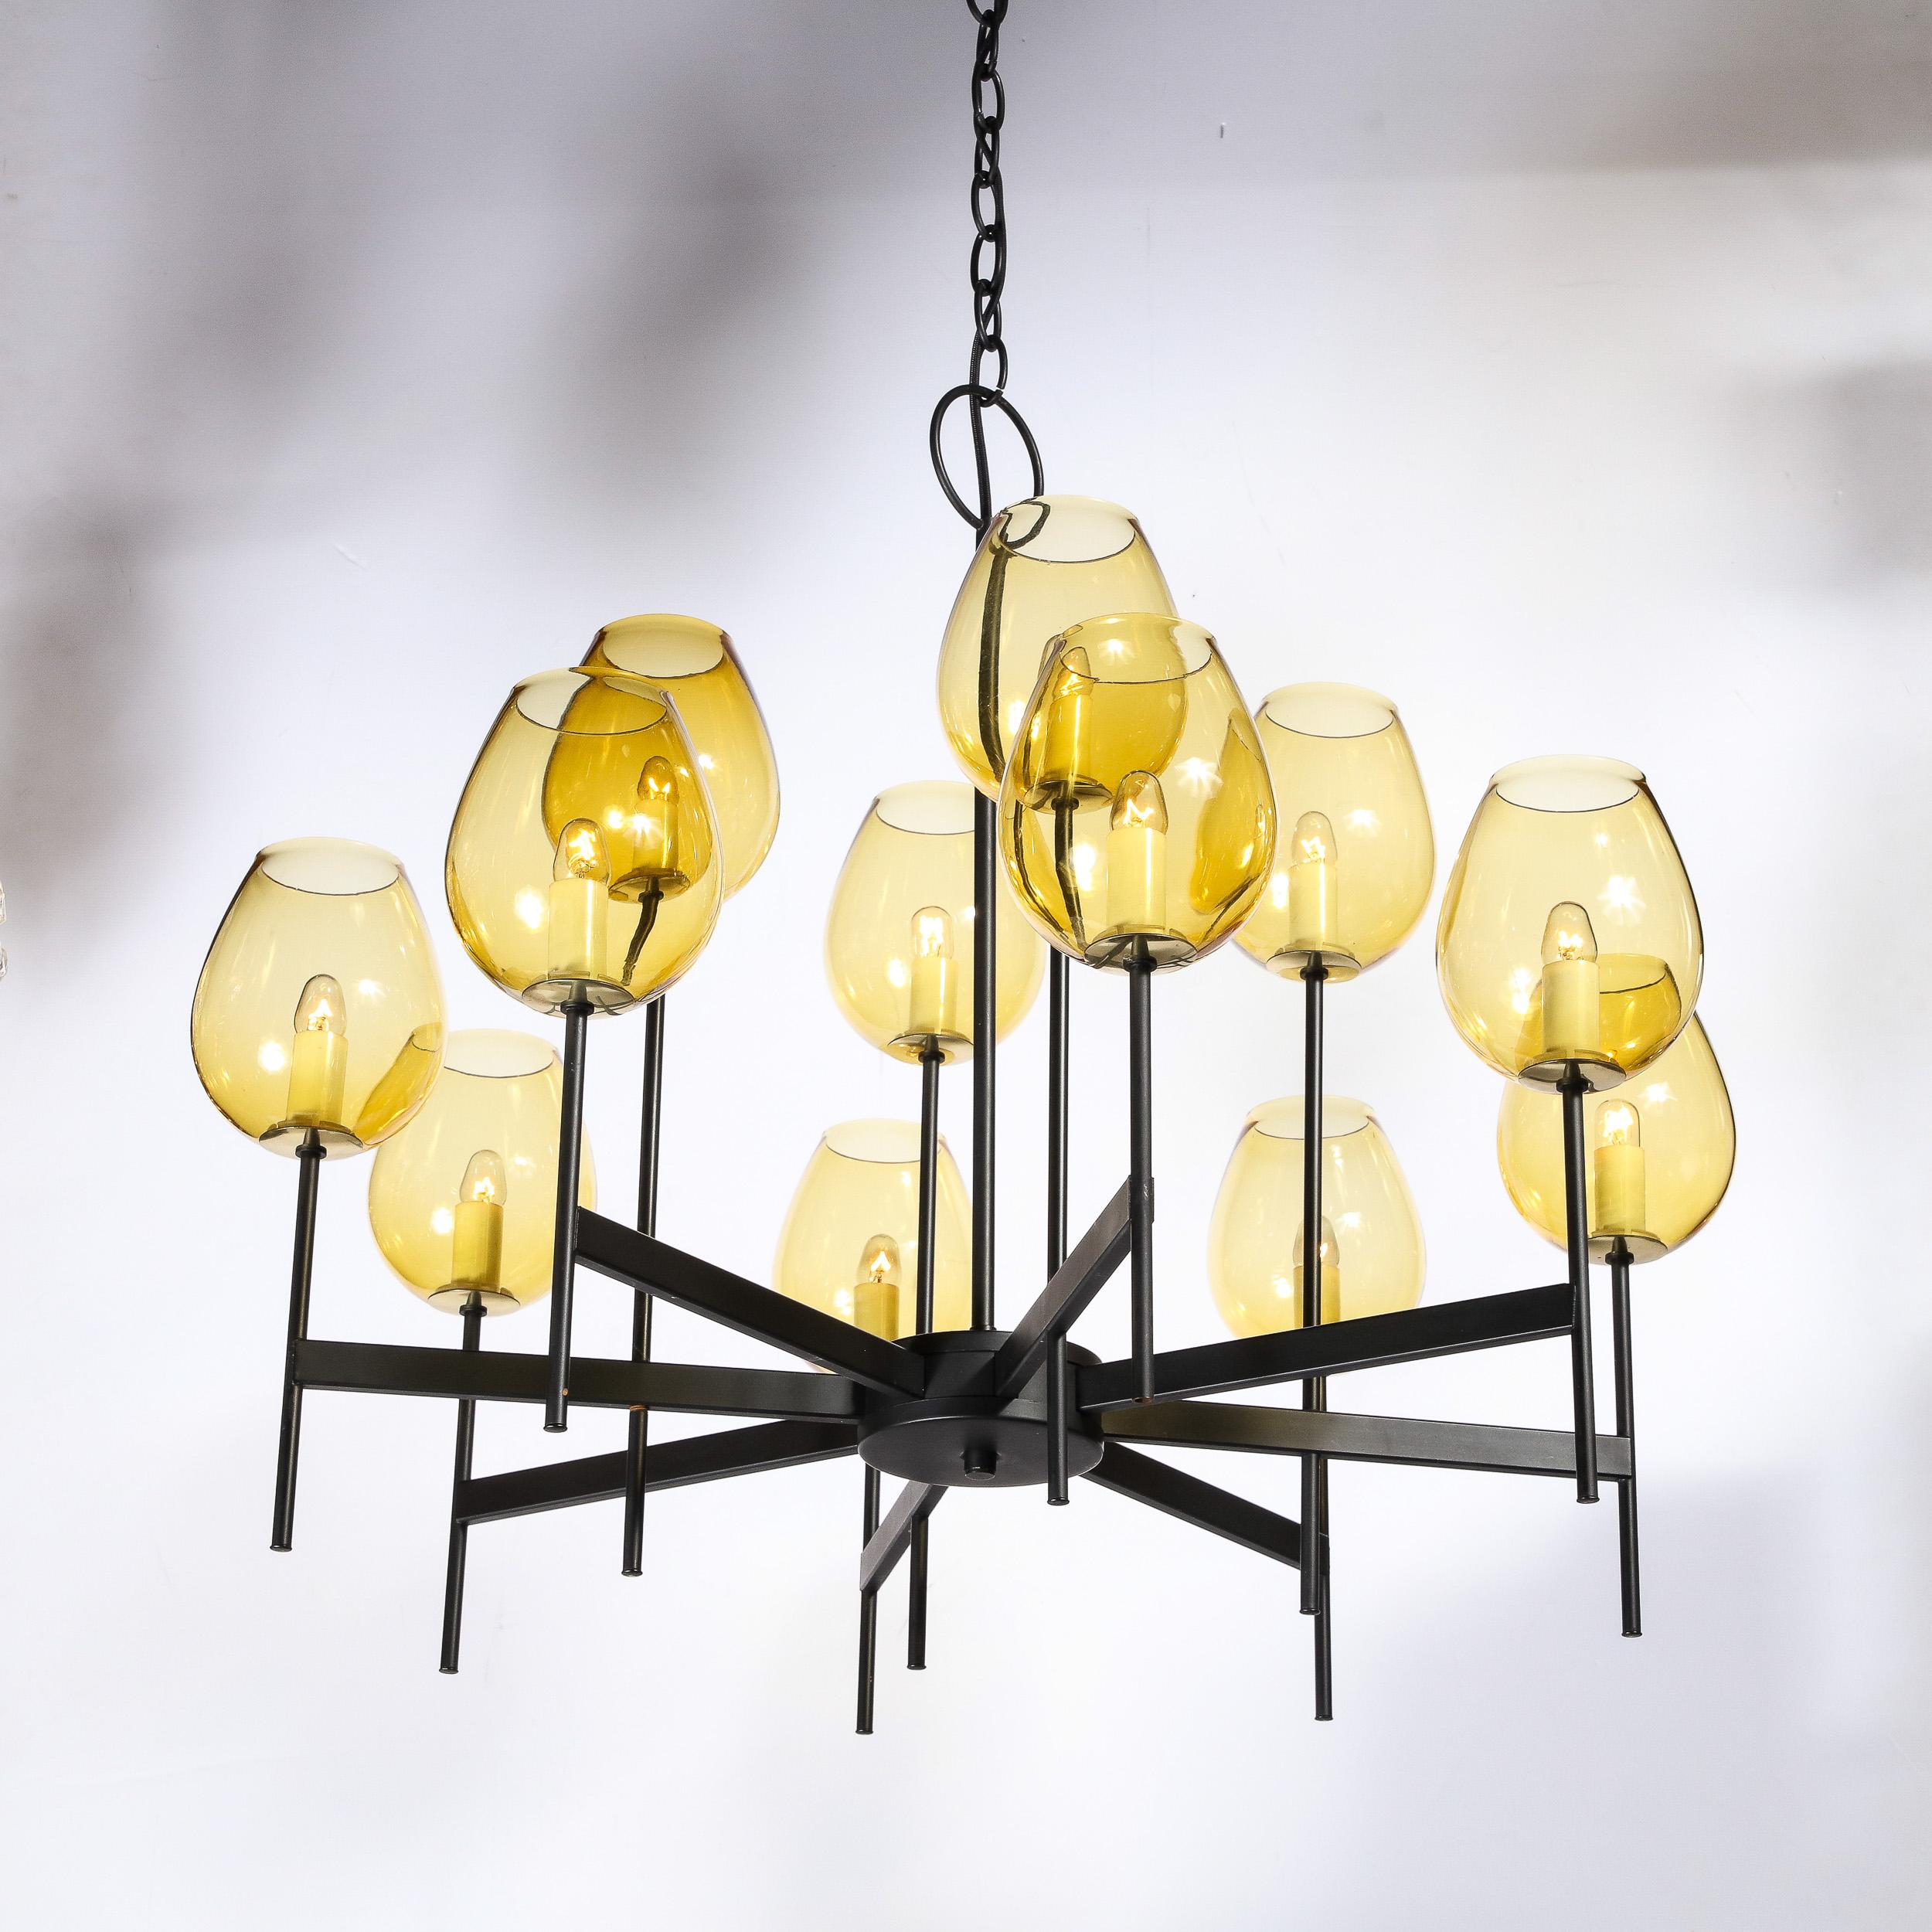 American Mid-Century Modernist Eight Arm Smoked Citrine Glass Chandelier by Lightolier